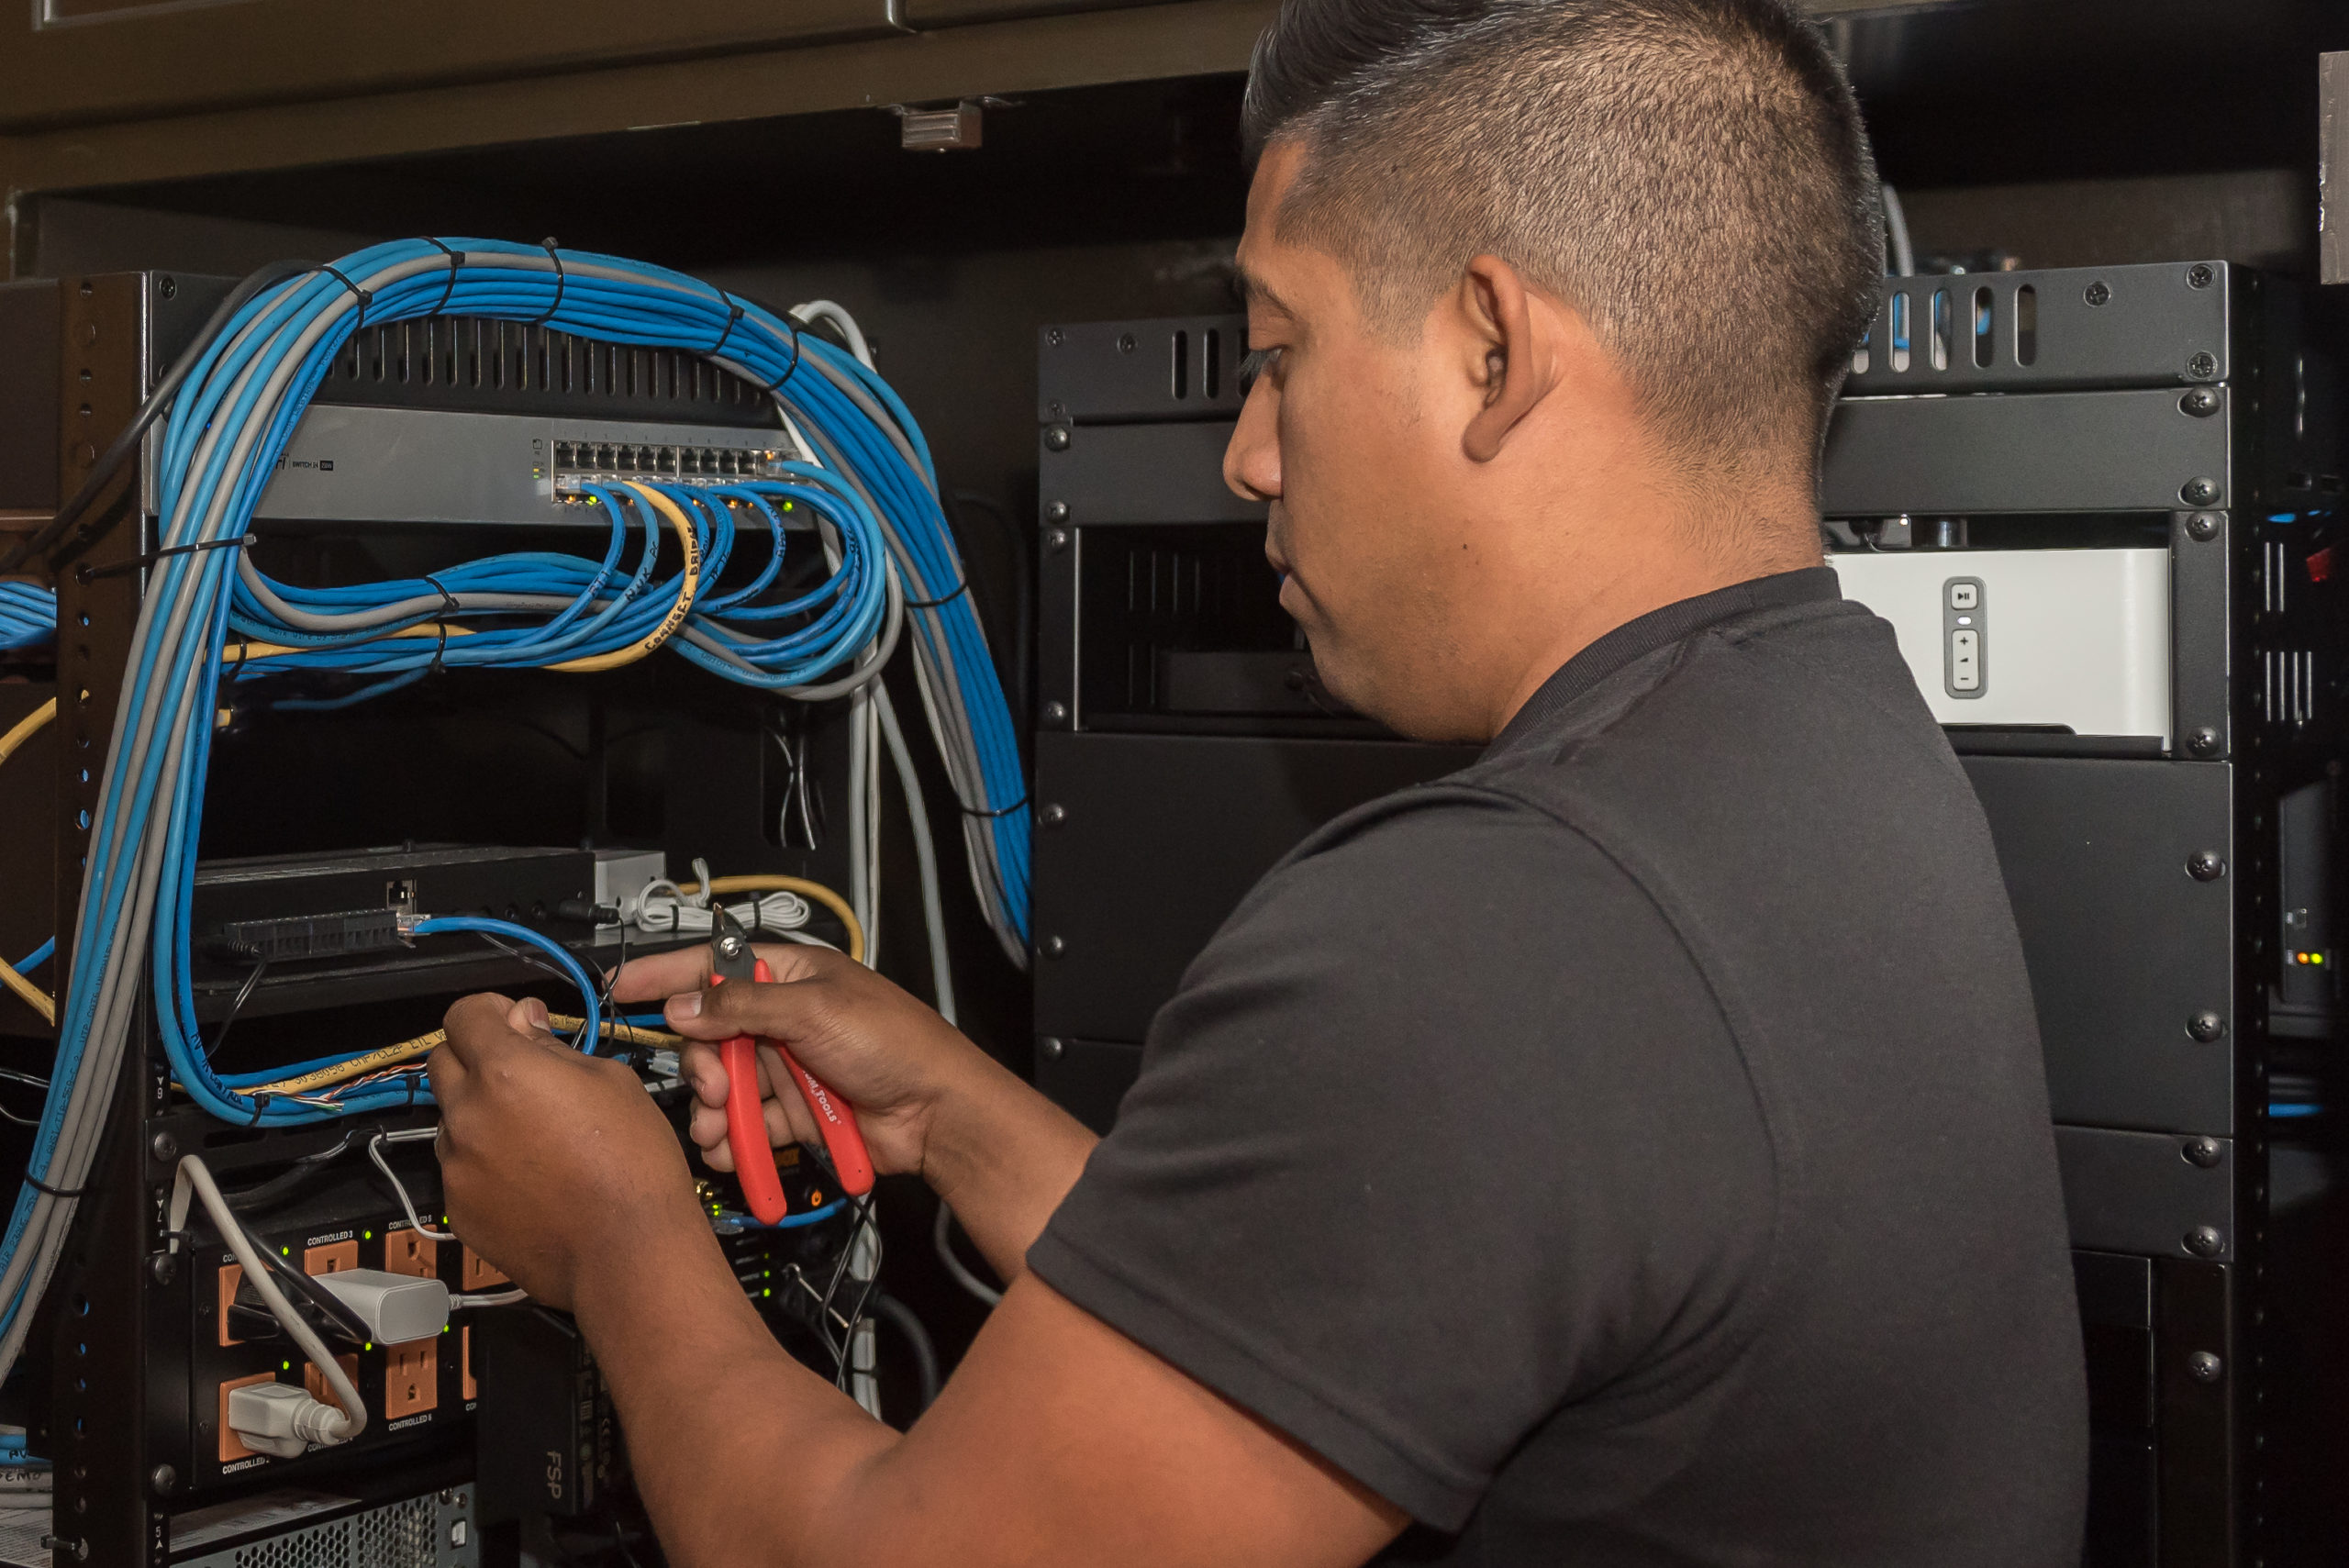 ACT employee working on hard wired network